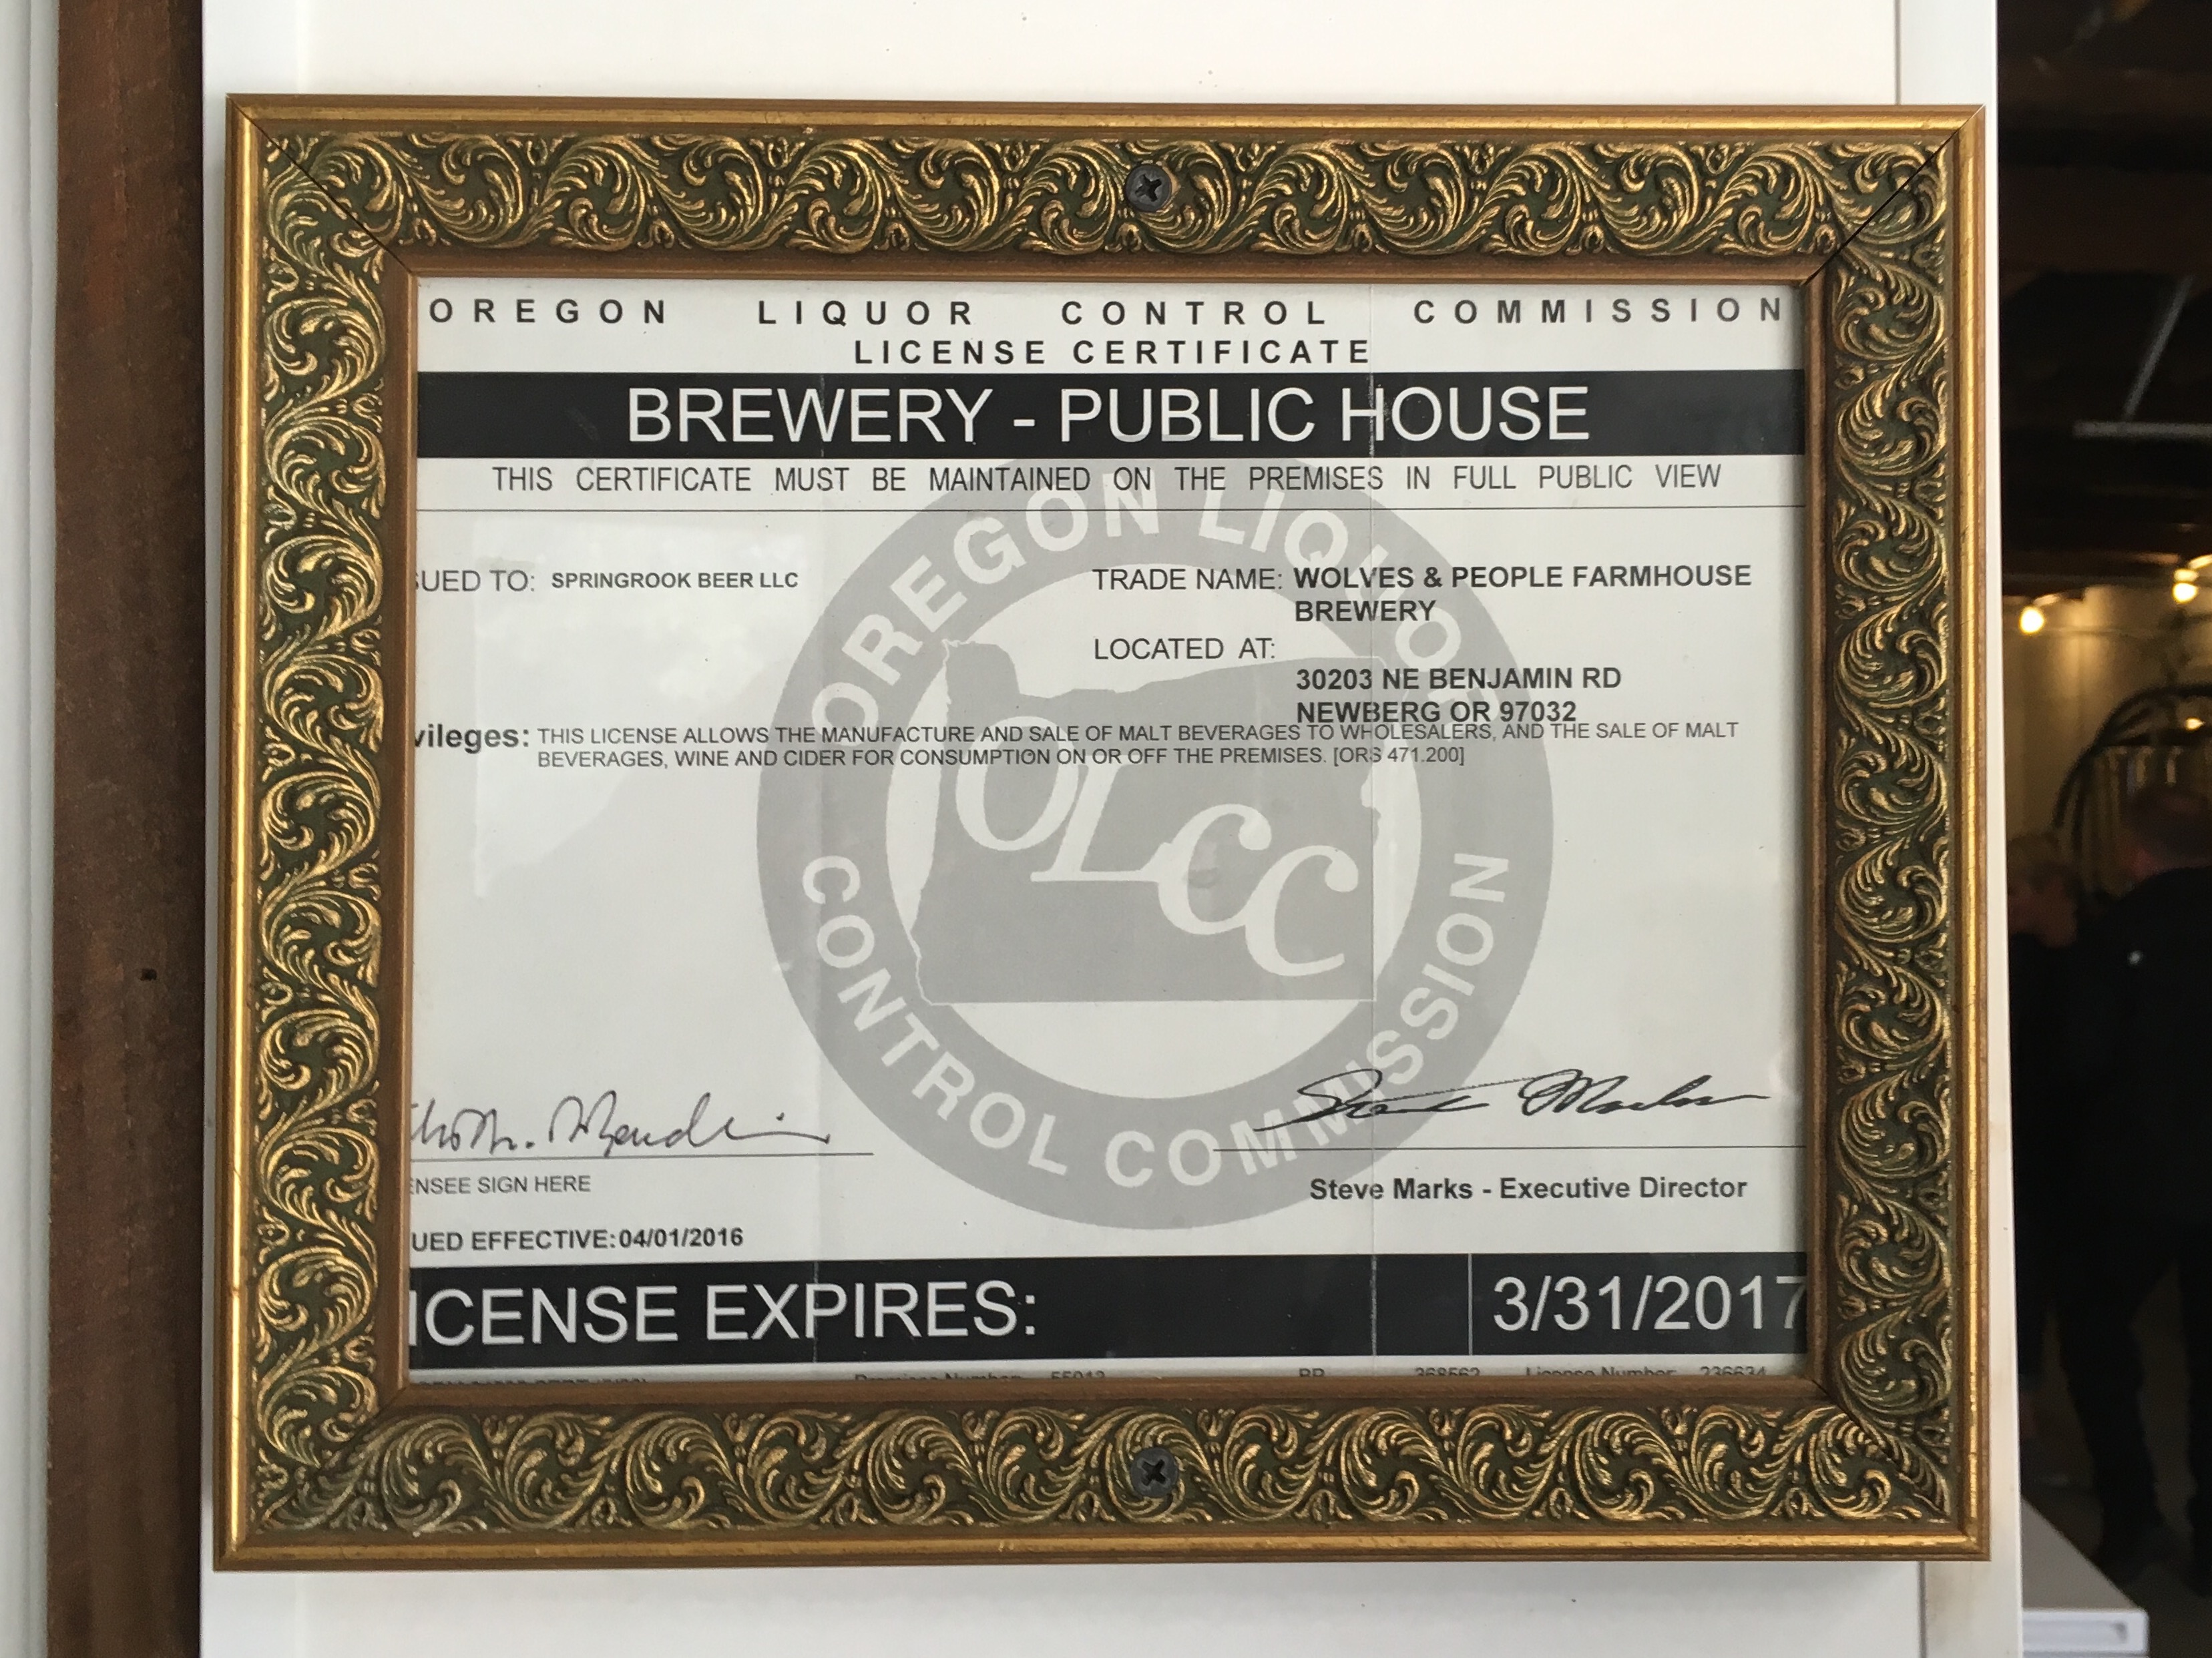 Wolves & People Farmhouse Brewery OLCC License.